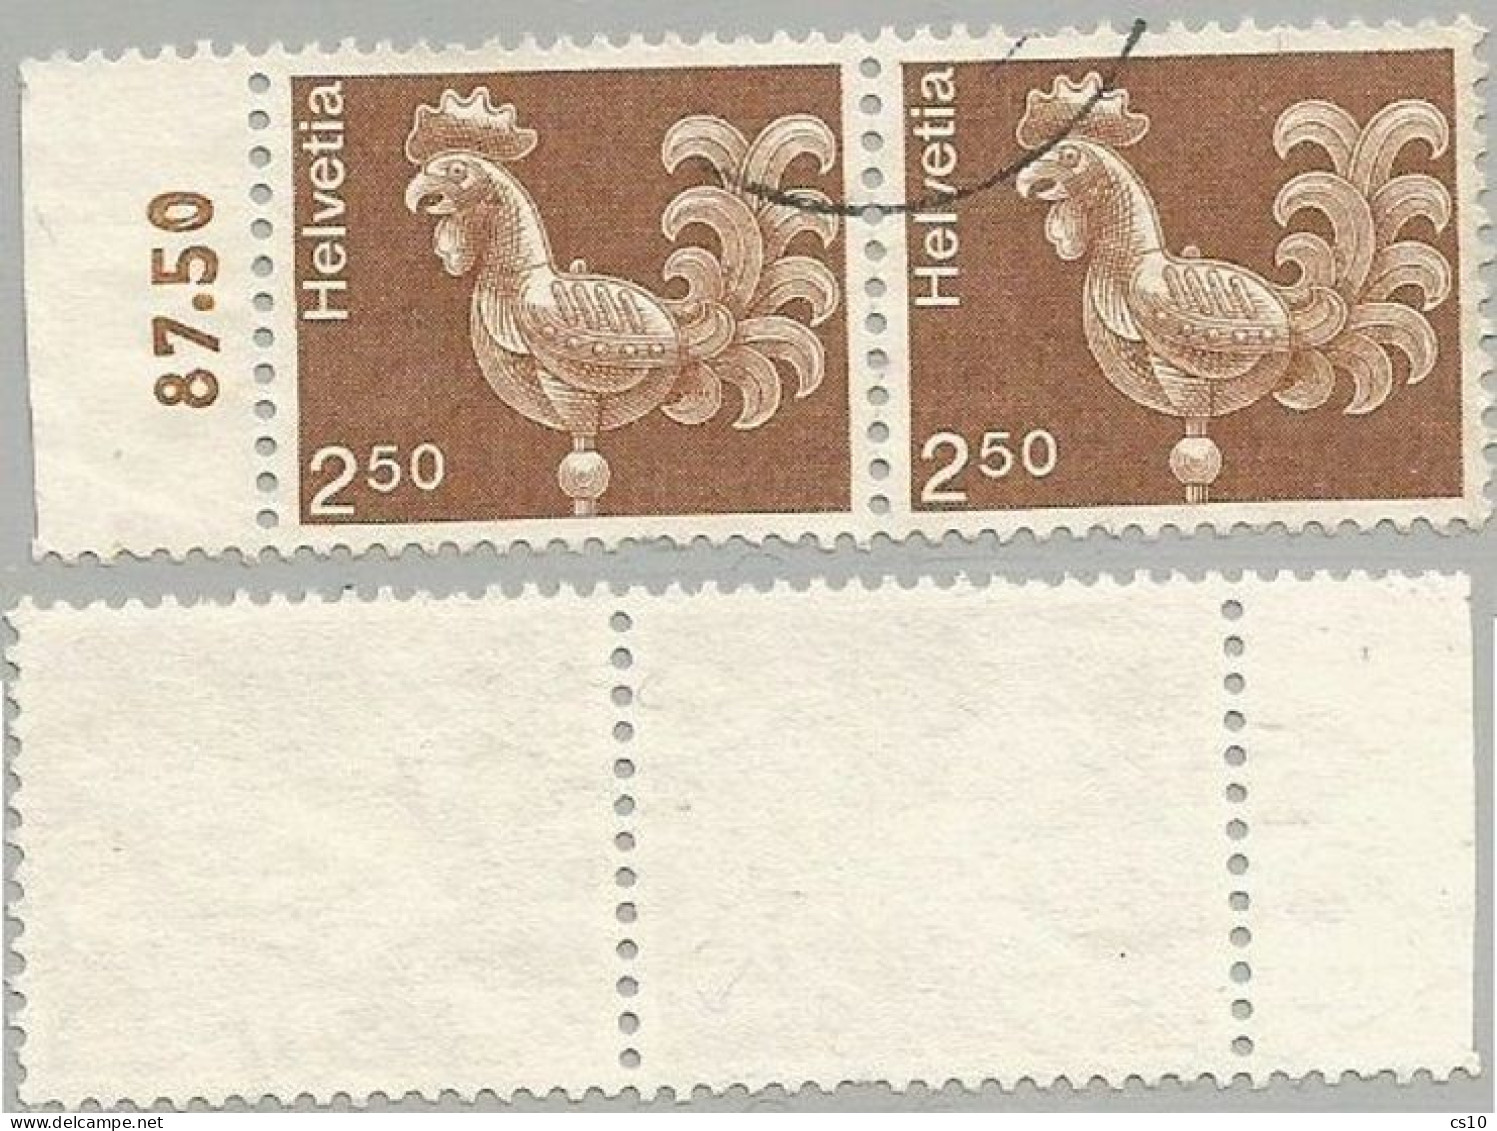 Suisse 1975 Artworks Wheatercock FS.2,50 - Scarce Variety NON FLUO PAPER - #2 Pcs In Horiz. Pair With Sheet Margin - Varietà